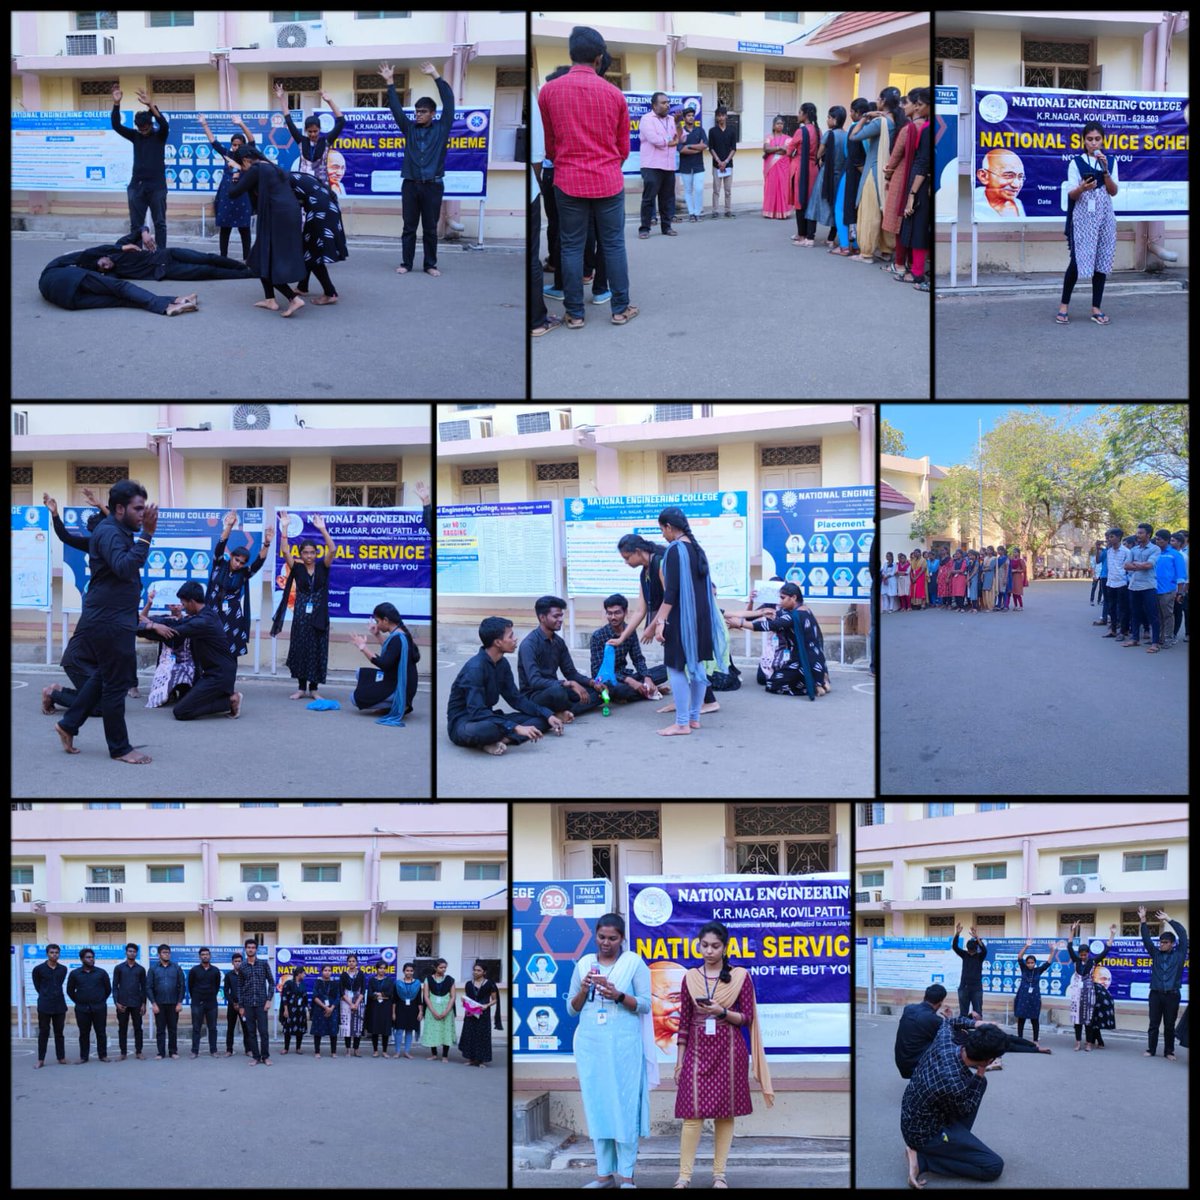 NEC NSS organized 'An awareness program on MANJAPAI' through the events Mime & Speech on 25/02/2023 at 4.30pm in front of Main building. We heartily congratulate to our NSS volunteers who took part in this event.
@connectingNss
@collectortuty
@_nssindia
@nss_tamilnadu
@NSSChennai